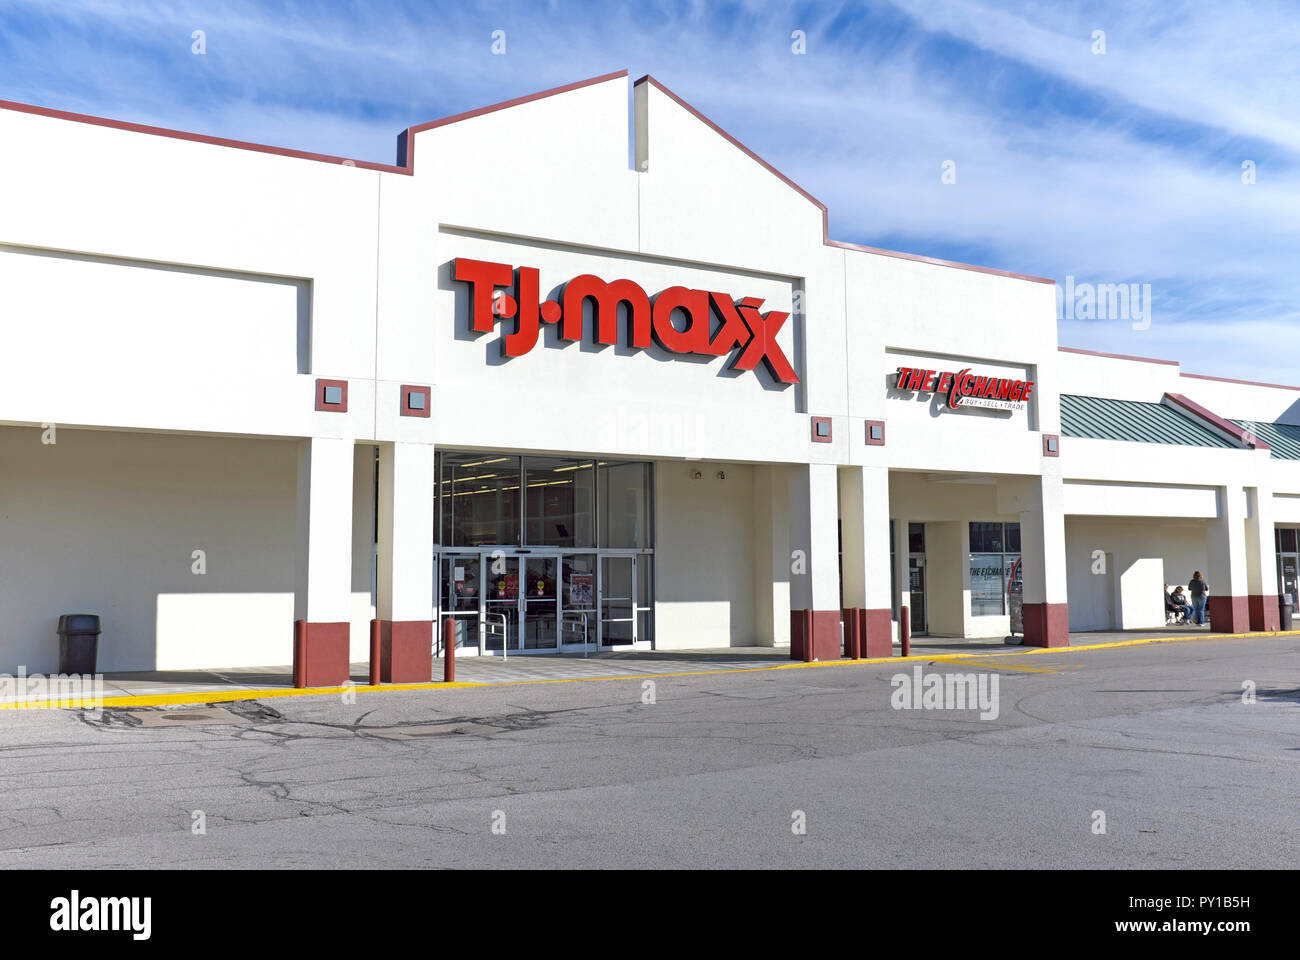 T.J. Maxx, an American based discount department store chain specializing in clothing, storefront in Willoughby, Ohio, USA. Stock Photo